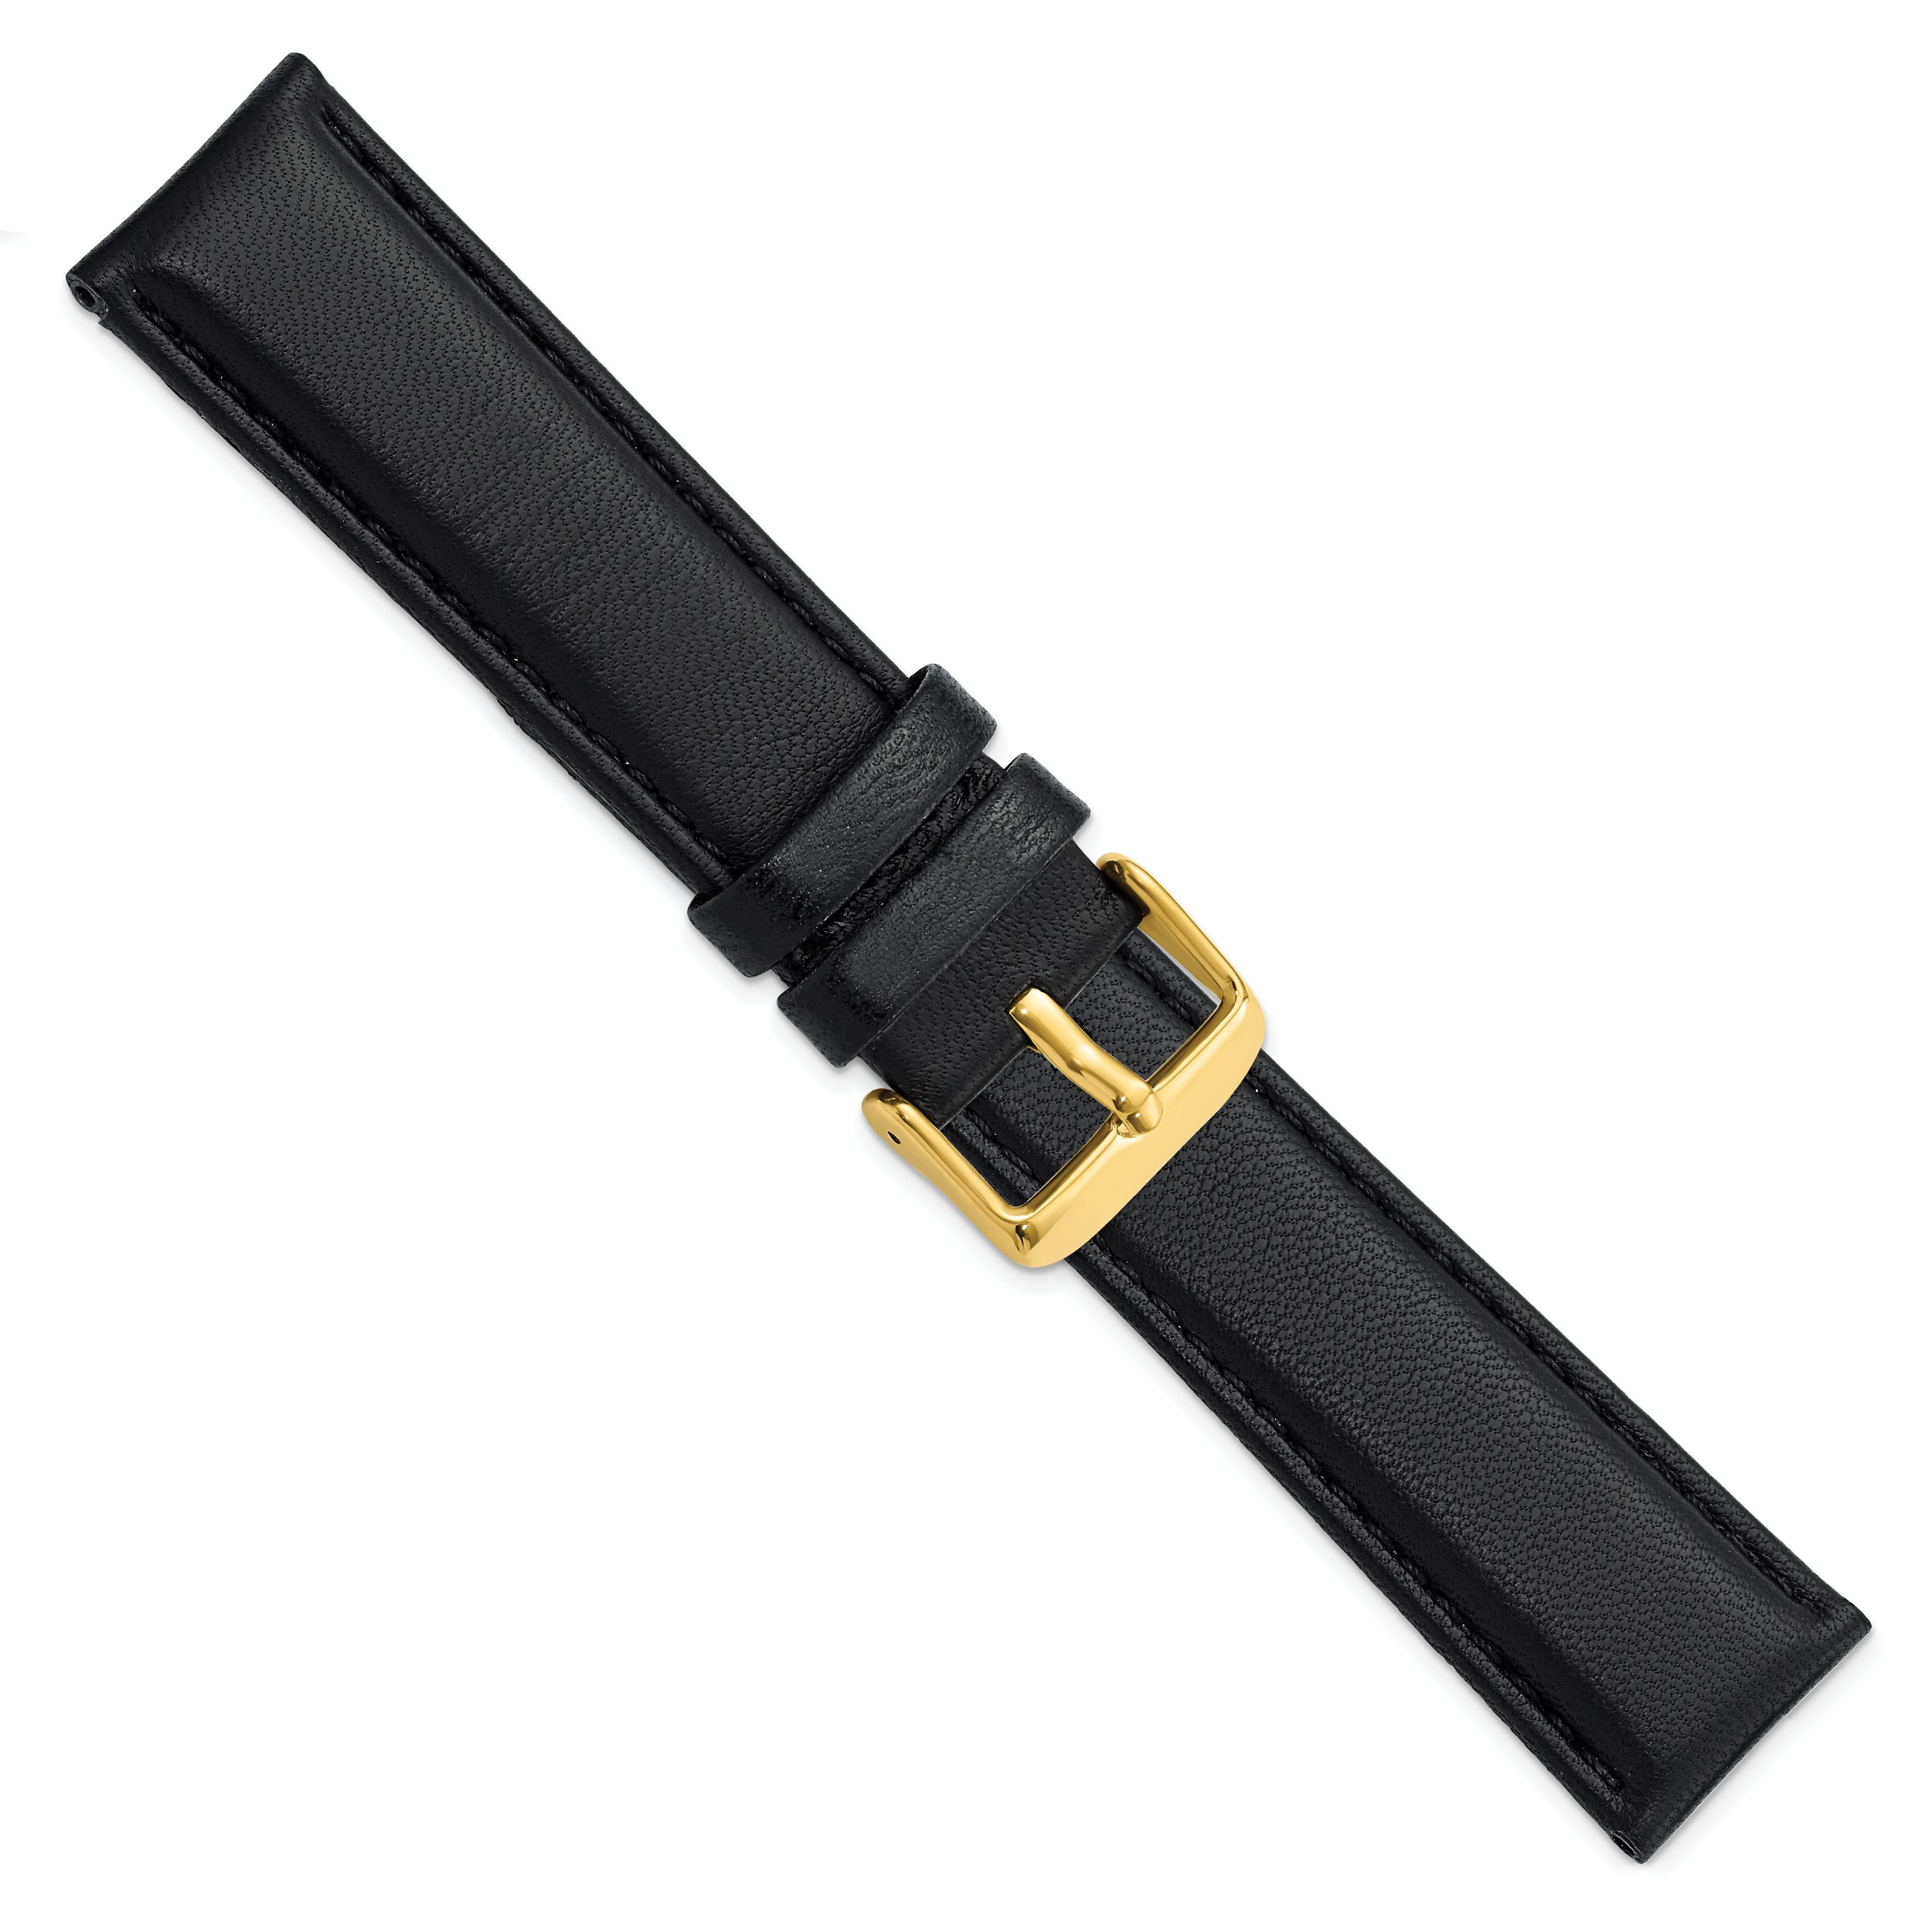 14mm Black Glove Leather with Gold-tone Panerai Style Buckle 6.75 inch Watch Band